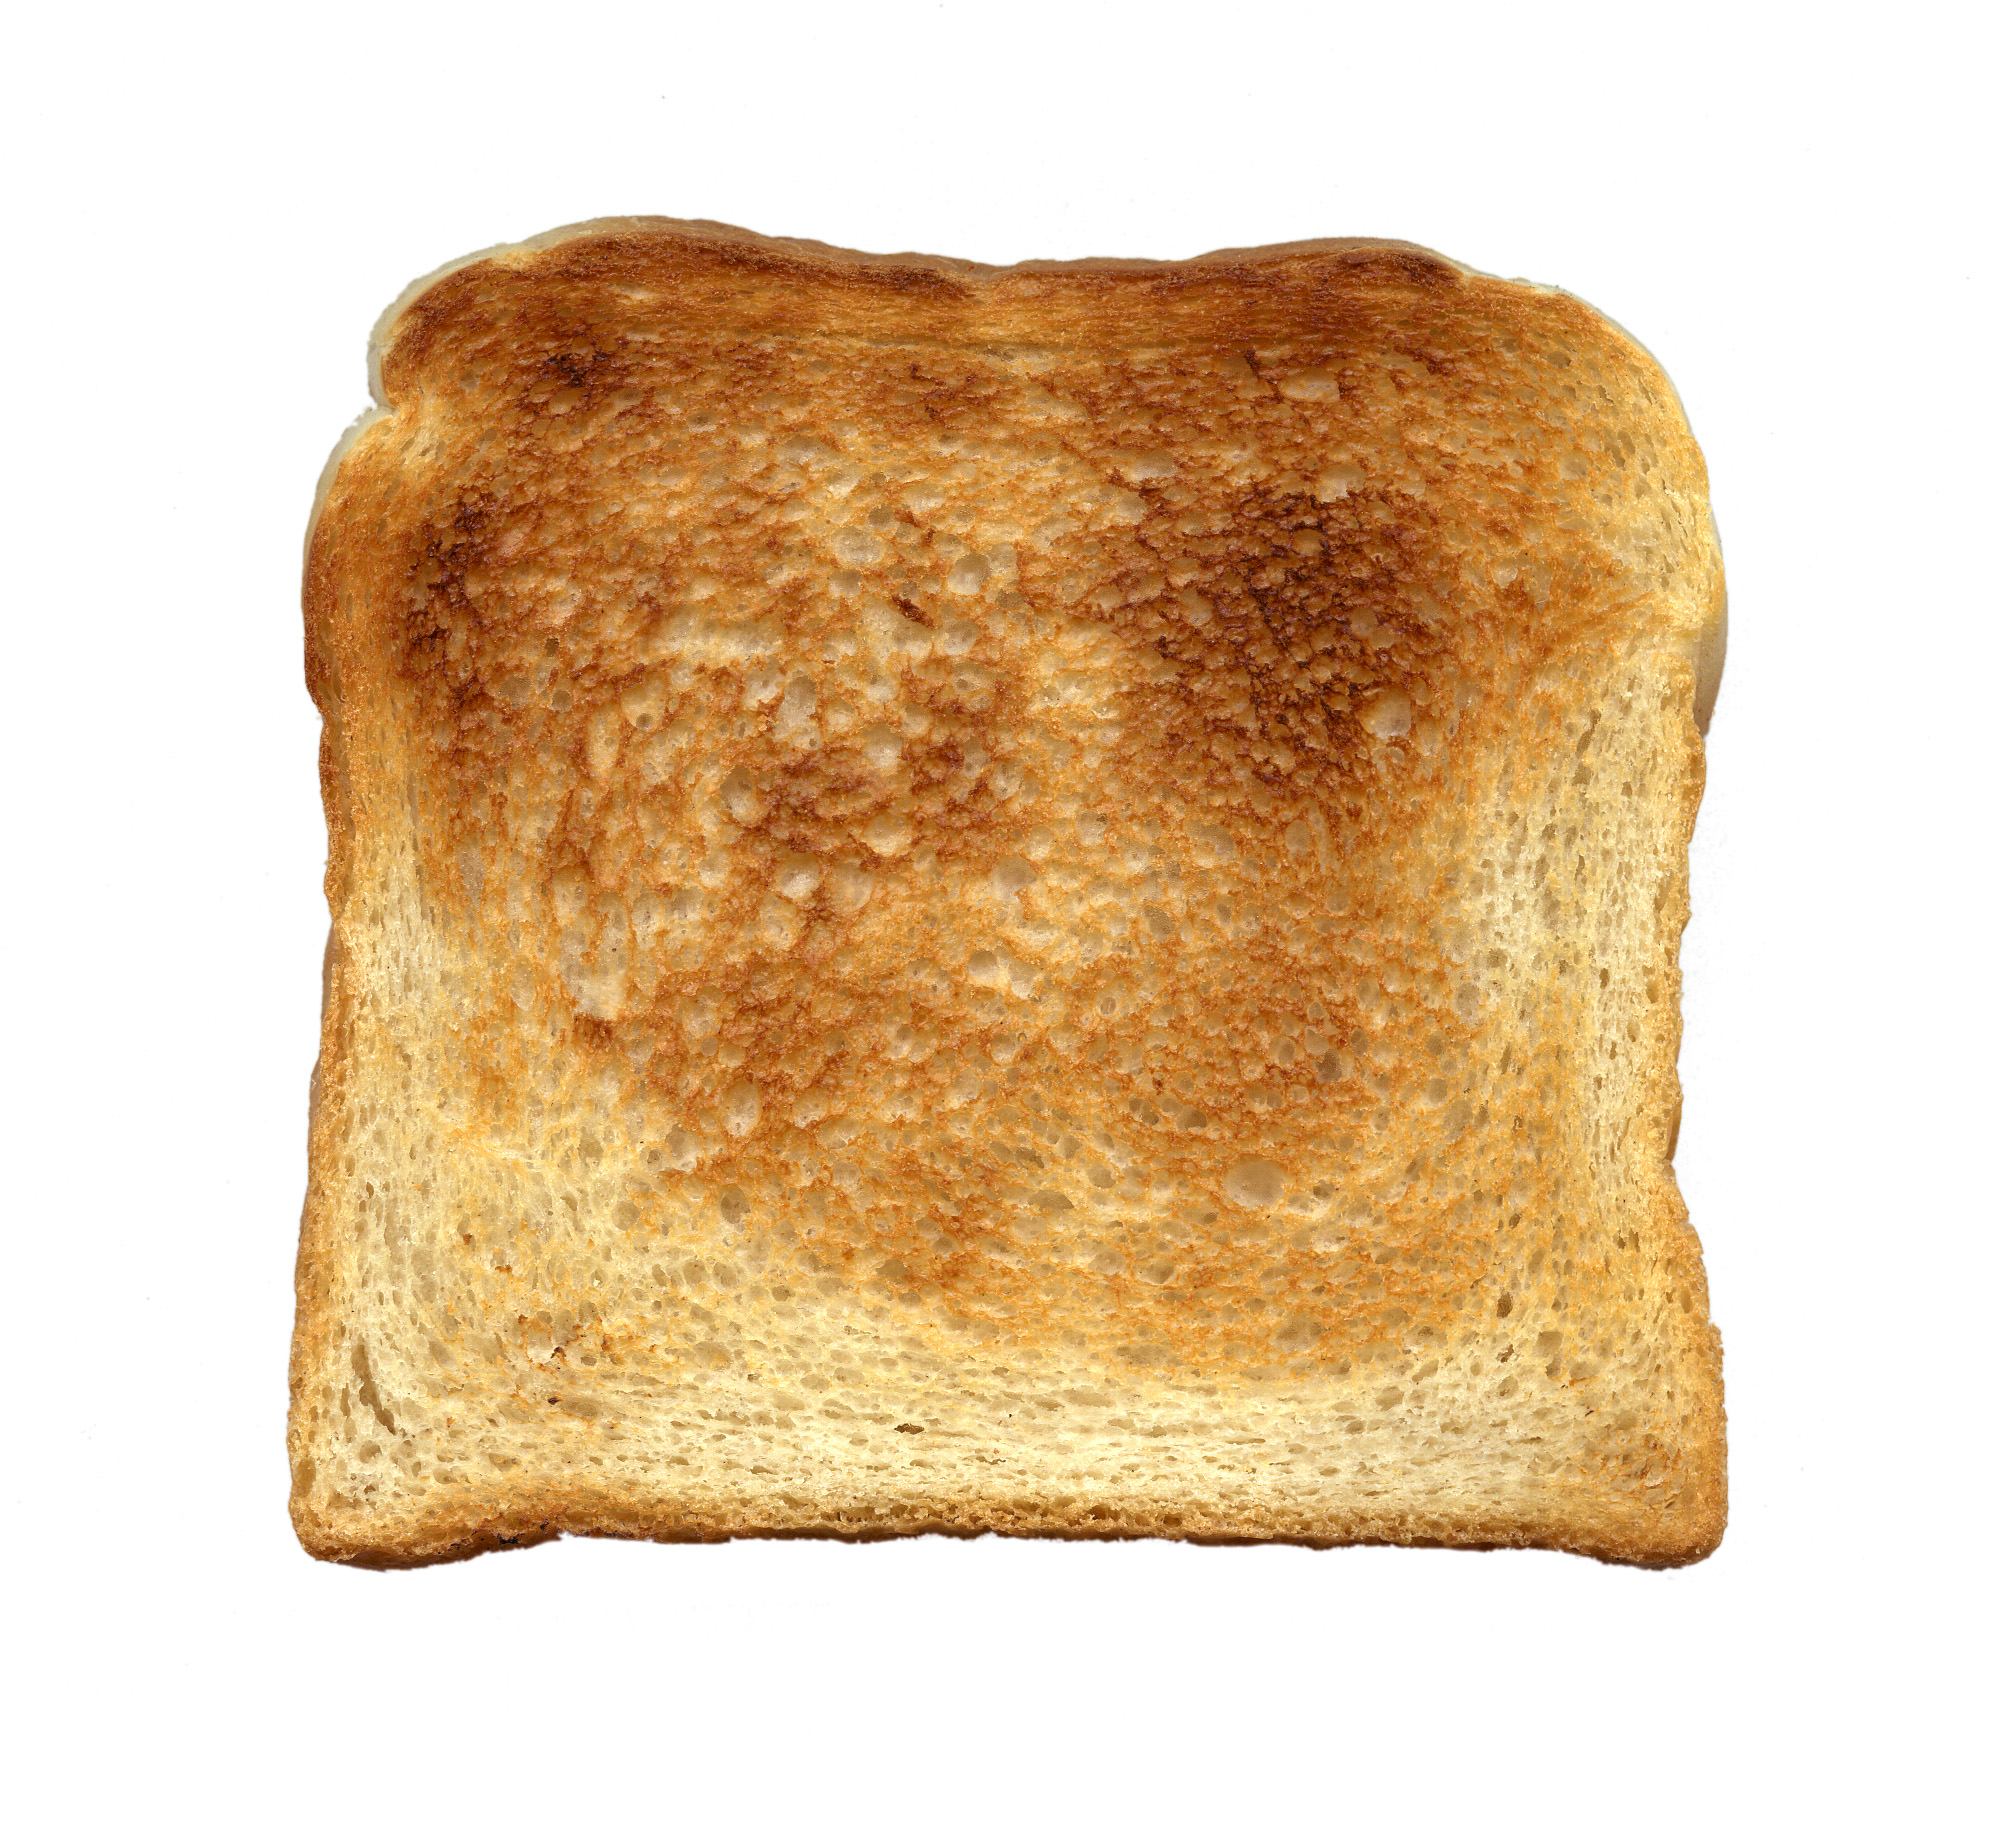 Toast Free Images At Clker Com Vector Clip Art Online Royalty